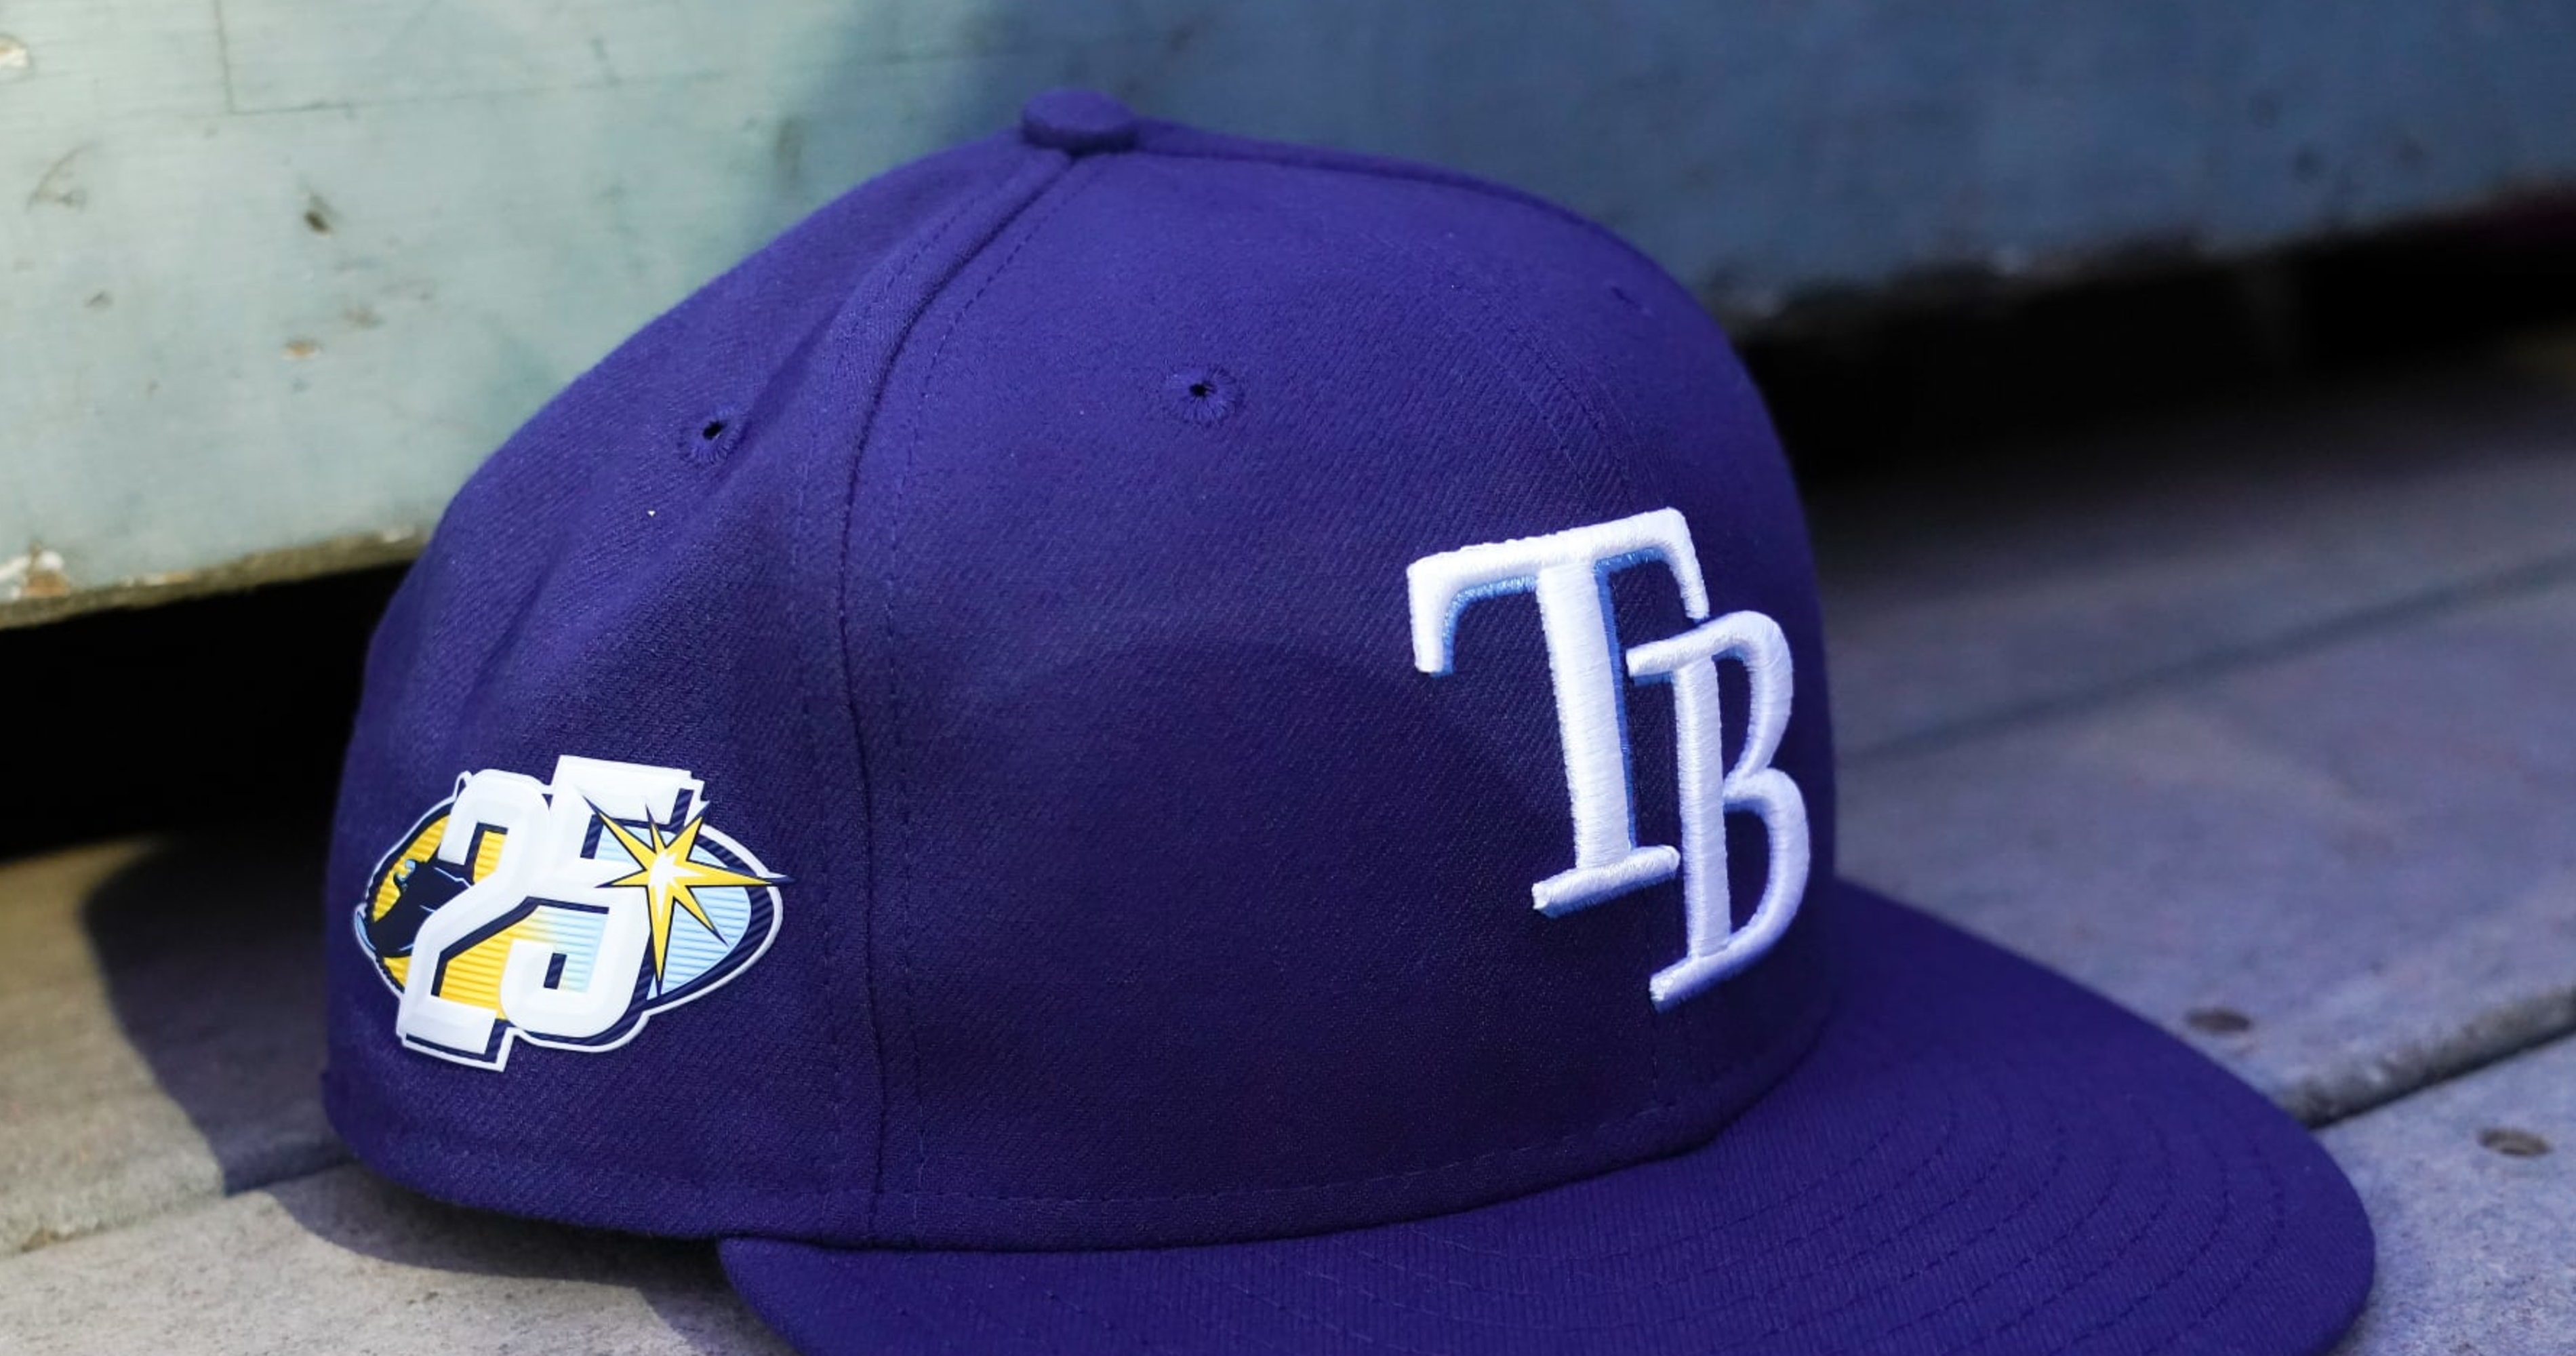 Rays New Stadium Approved - Tampa News Force